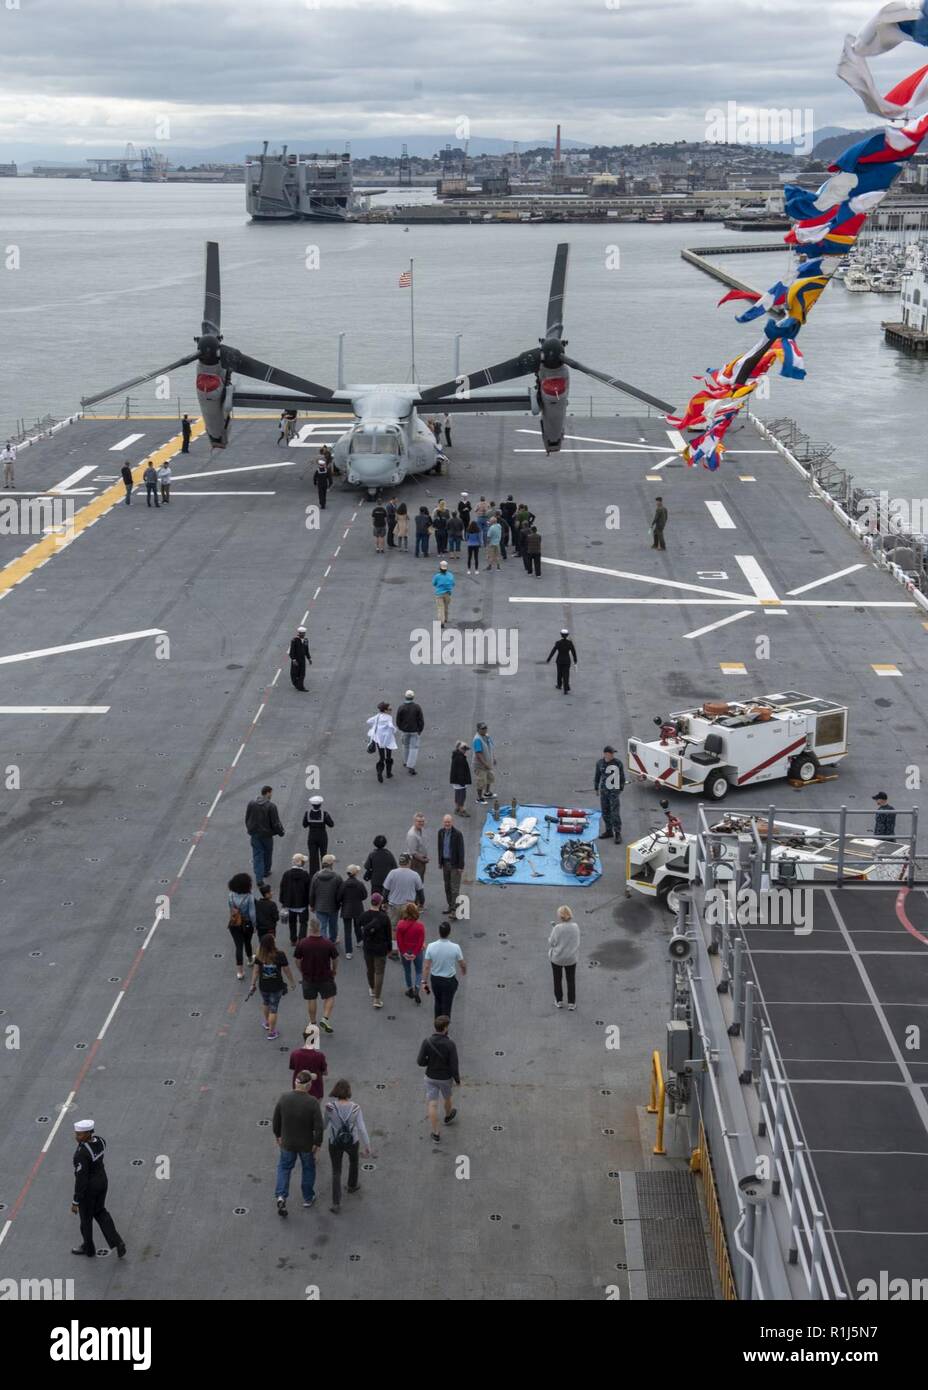 SAN FRANCISCO (Oct. 4, 2018) Visitors tour the flight deck of the amphibious assault ship USS Bonhomme Richard (LHD 6) during a general public ship tour as part of San Francisco Fleet Week 2018. San Francisco Fleet Week is an opportunity for the American public to meet their Navy, Marine Corps and Coast Guard teams and experience America’s sea services. During fleet week, service members participate in various community service events, showcase capabilities and equipment to the community, and enjoy the hospitality of San Francisco and its surrounding areas. Stock Photo